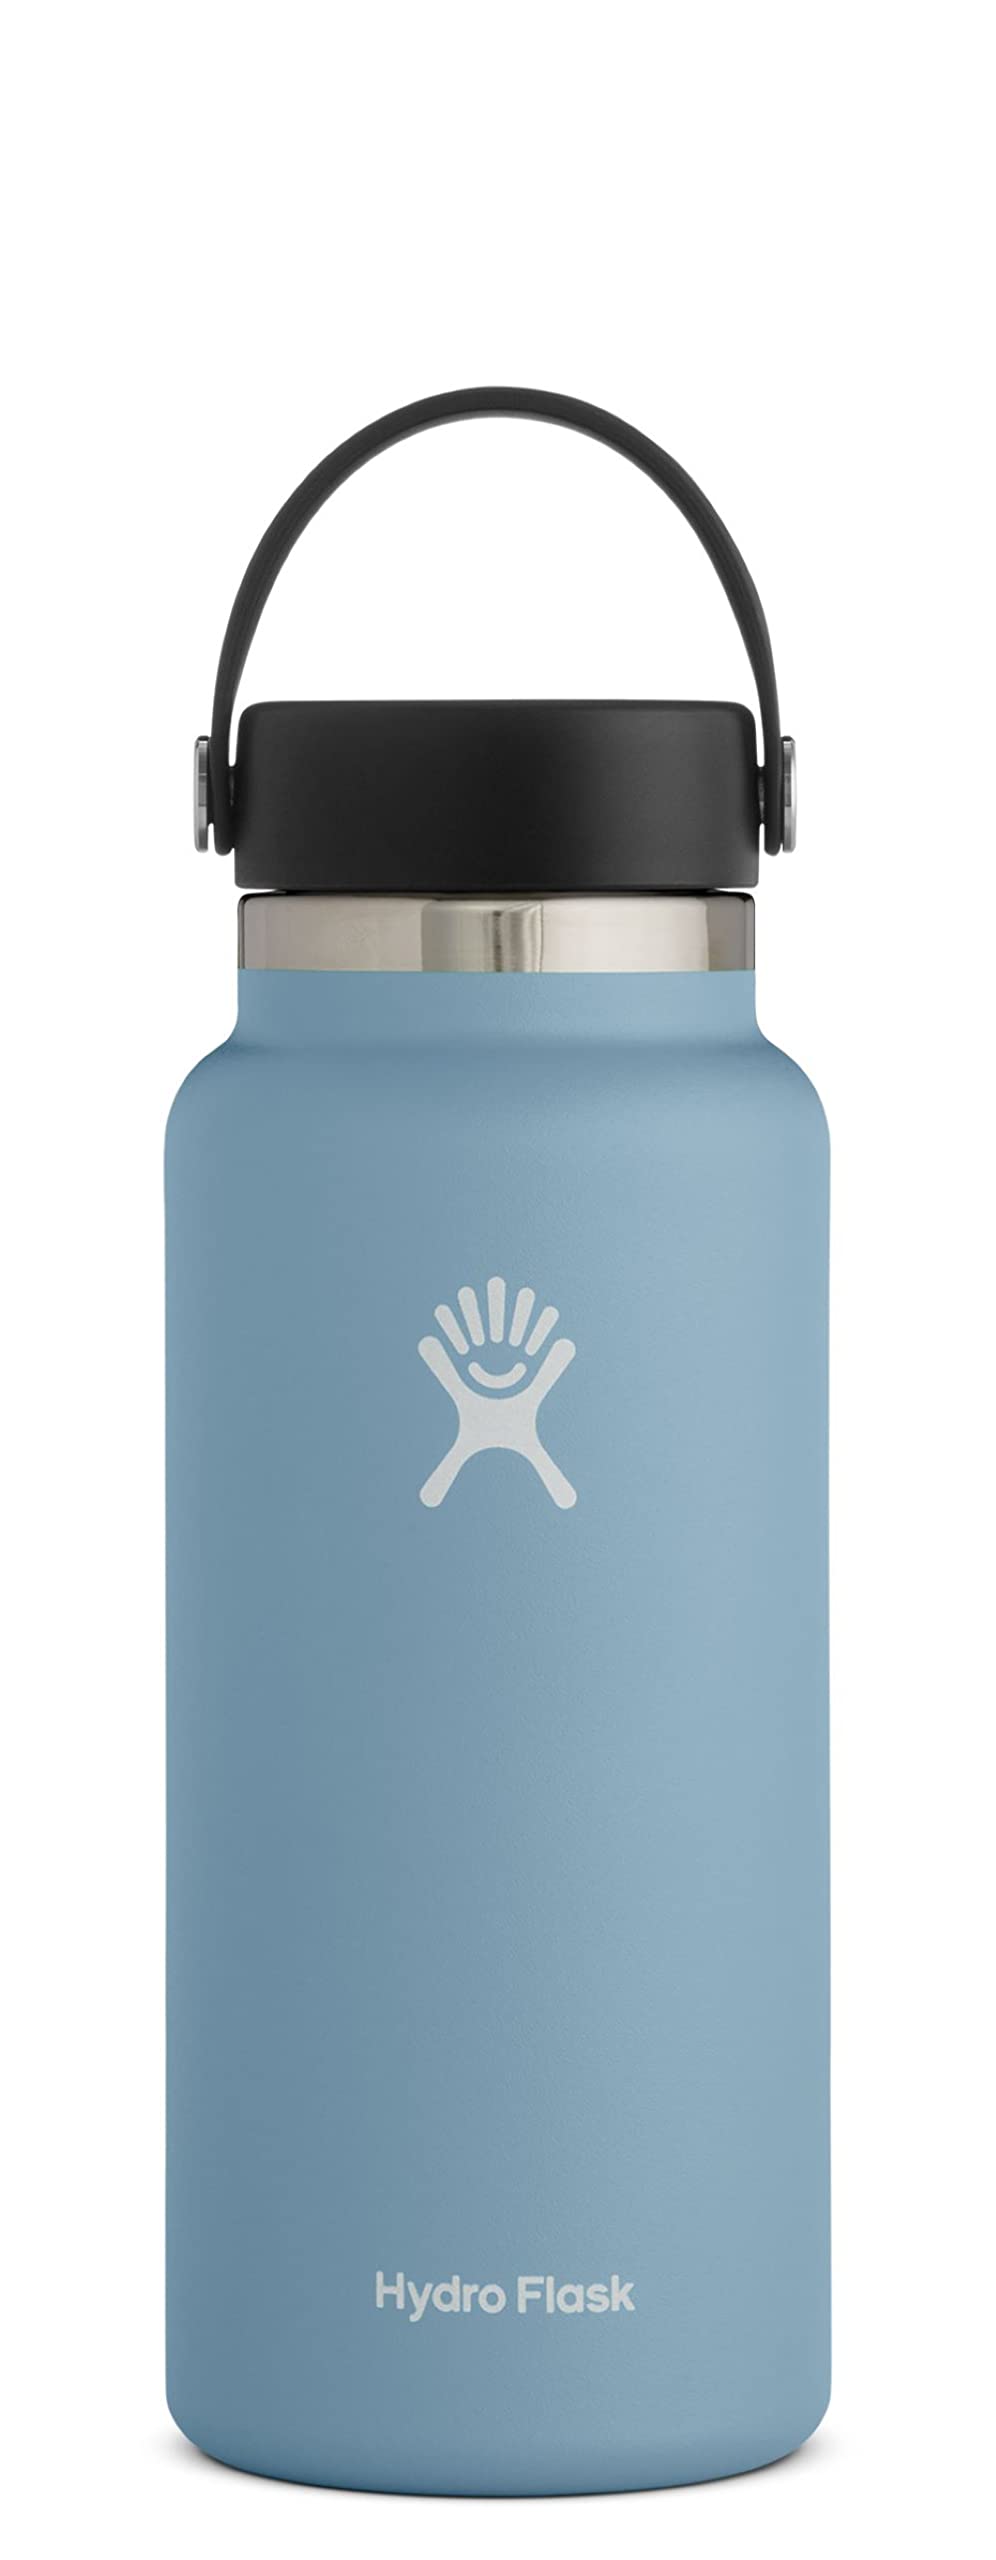 Hydro Flask 32 oz Vacuum Insulated Stainless Steel Water Bottle Flask - Flex Cap with Strap  - Wide Mouth - Rain